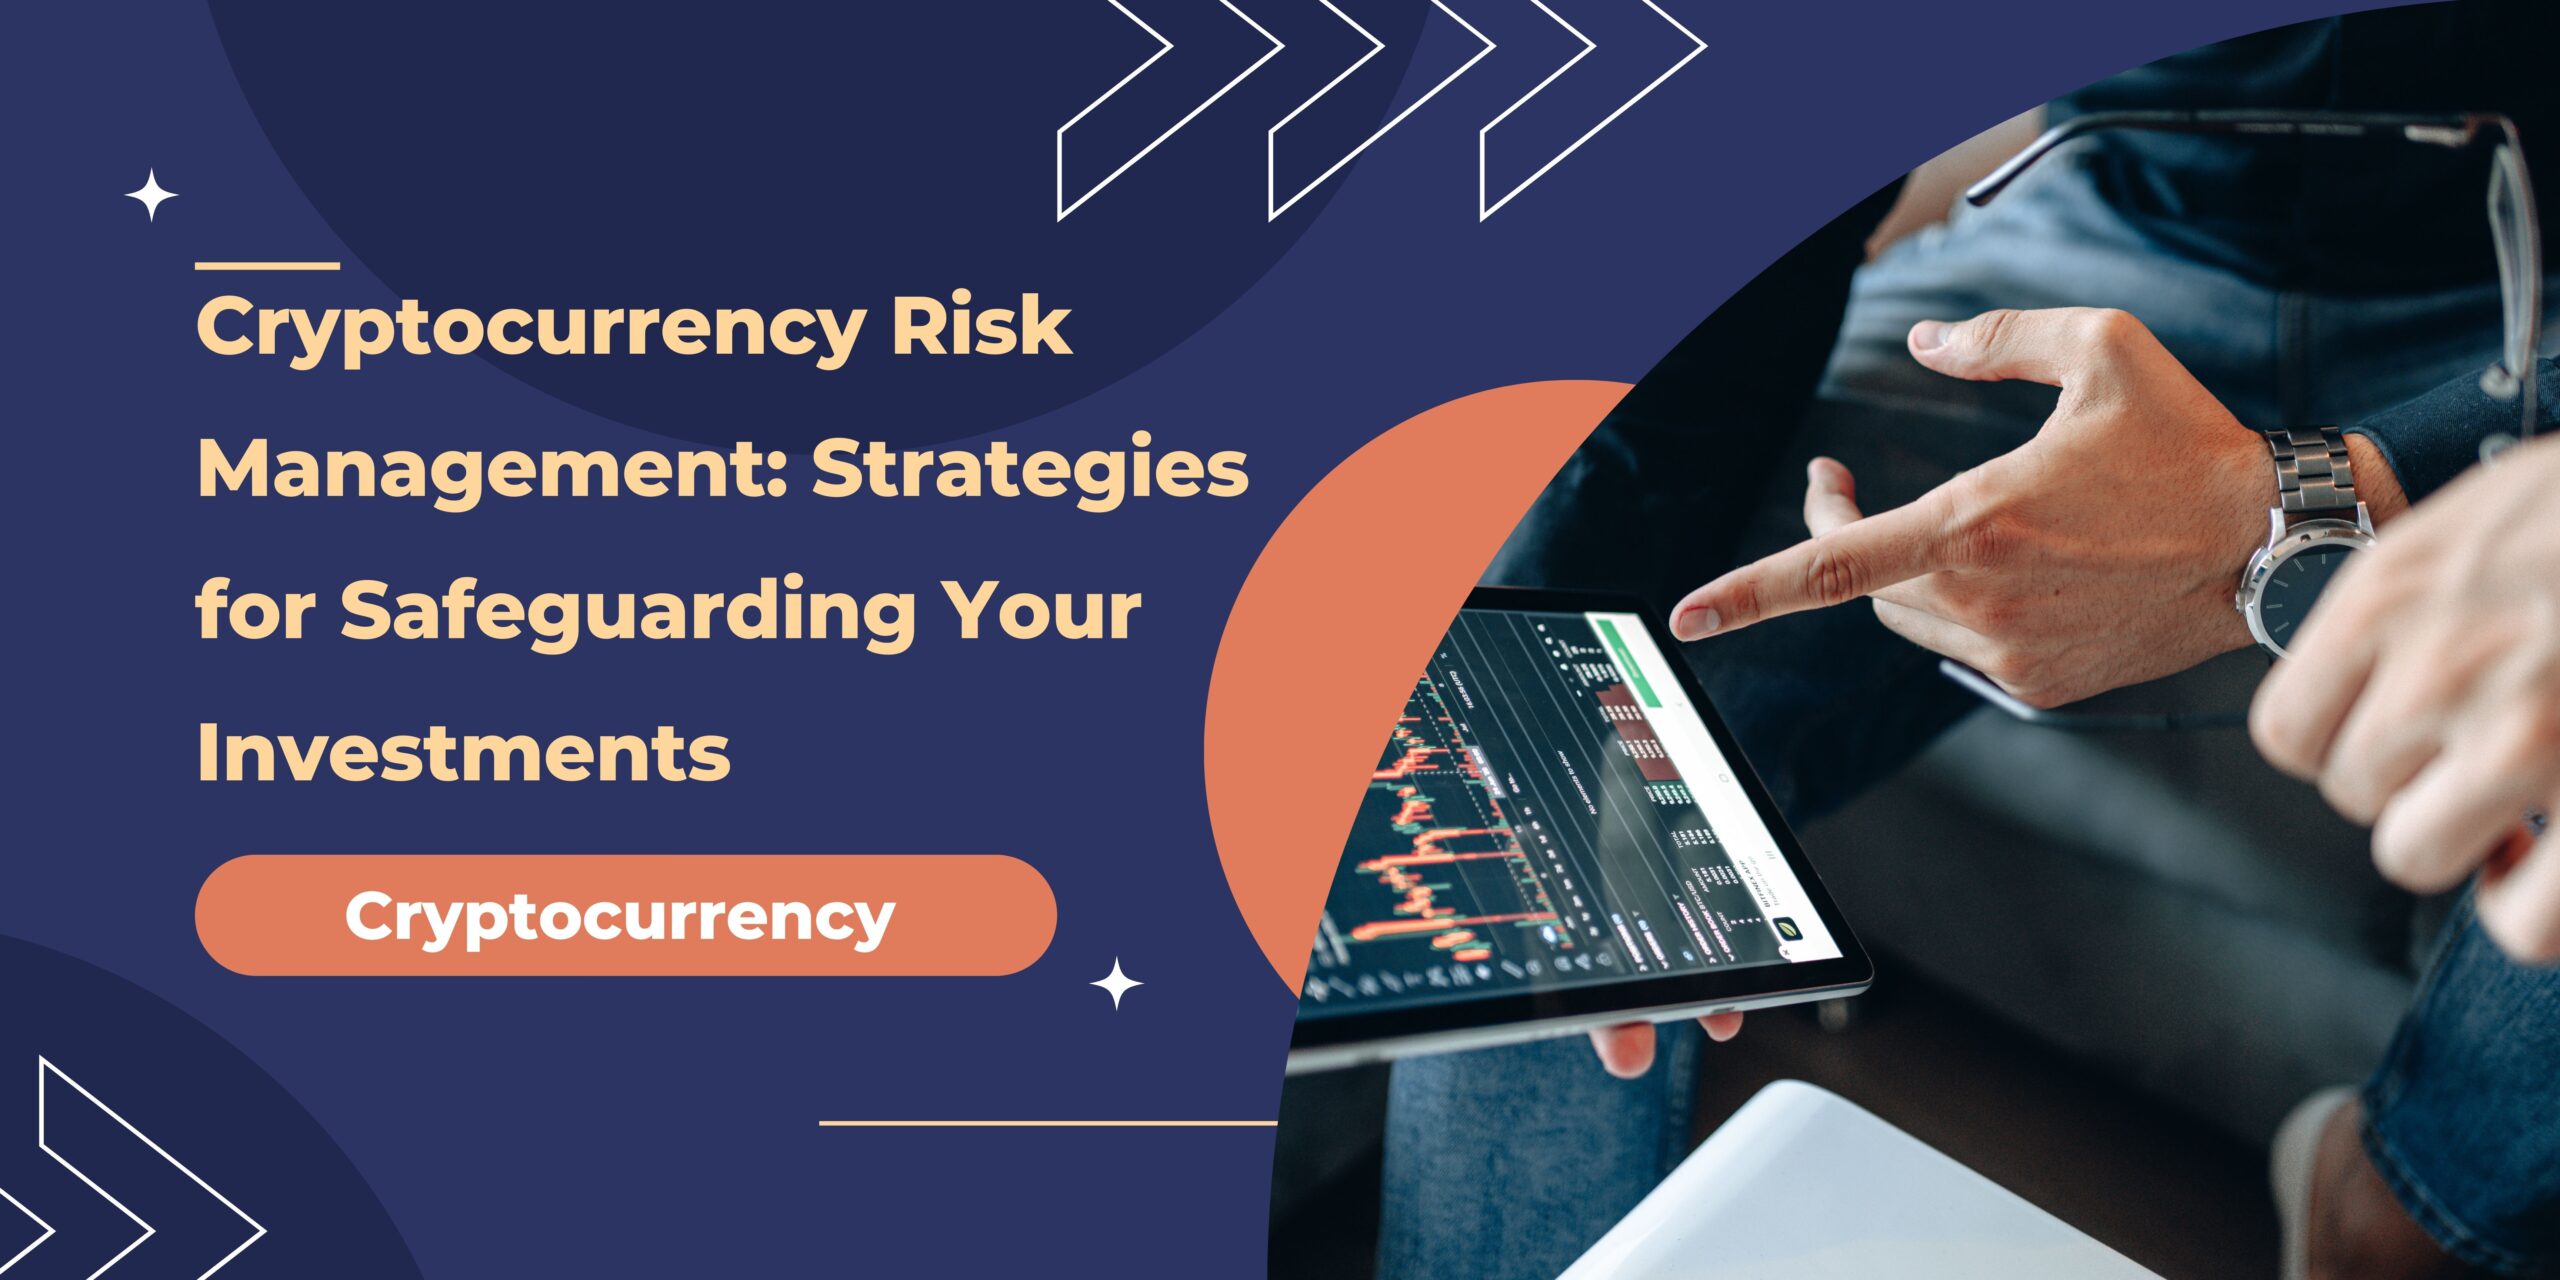 Cryptocurrency Risk Management: Strategies for Safeguarding Your Investments